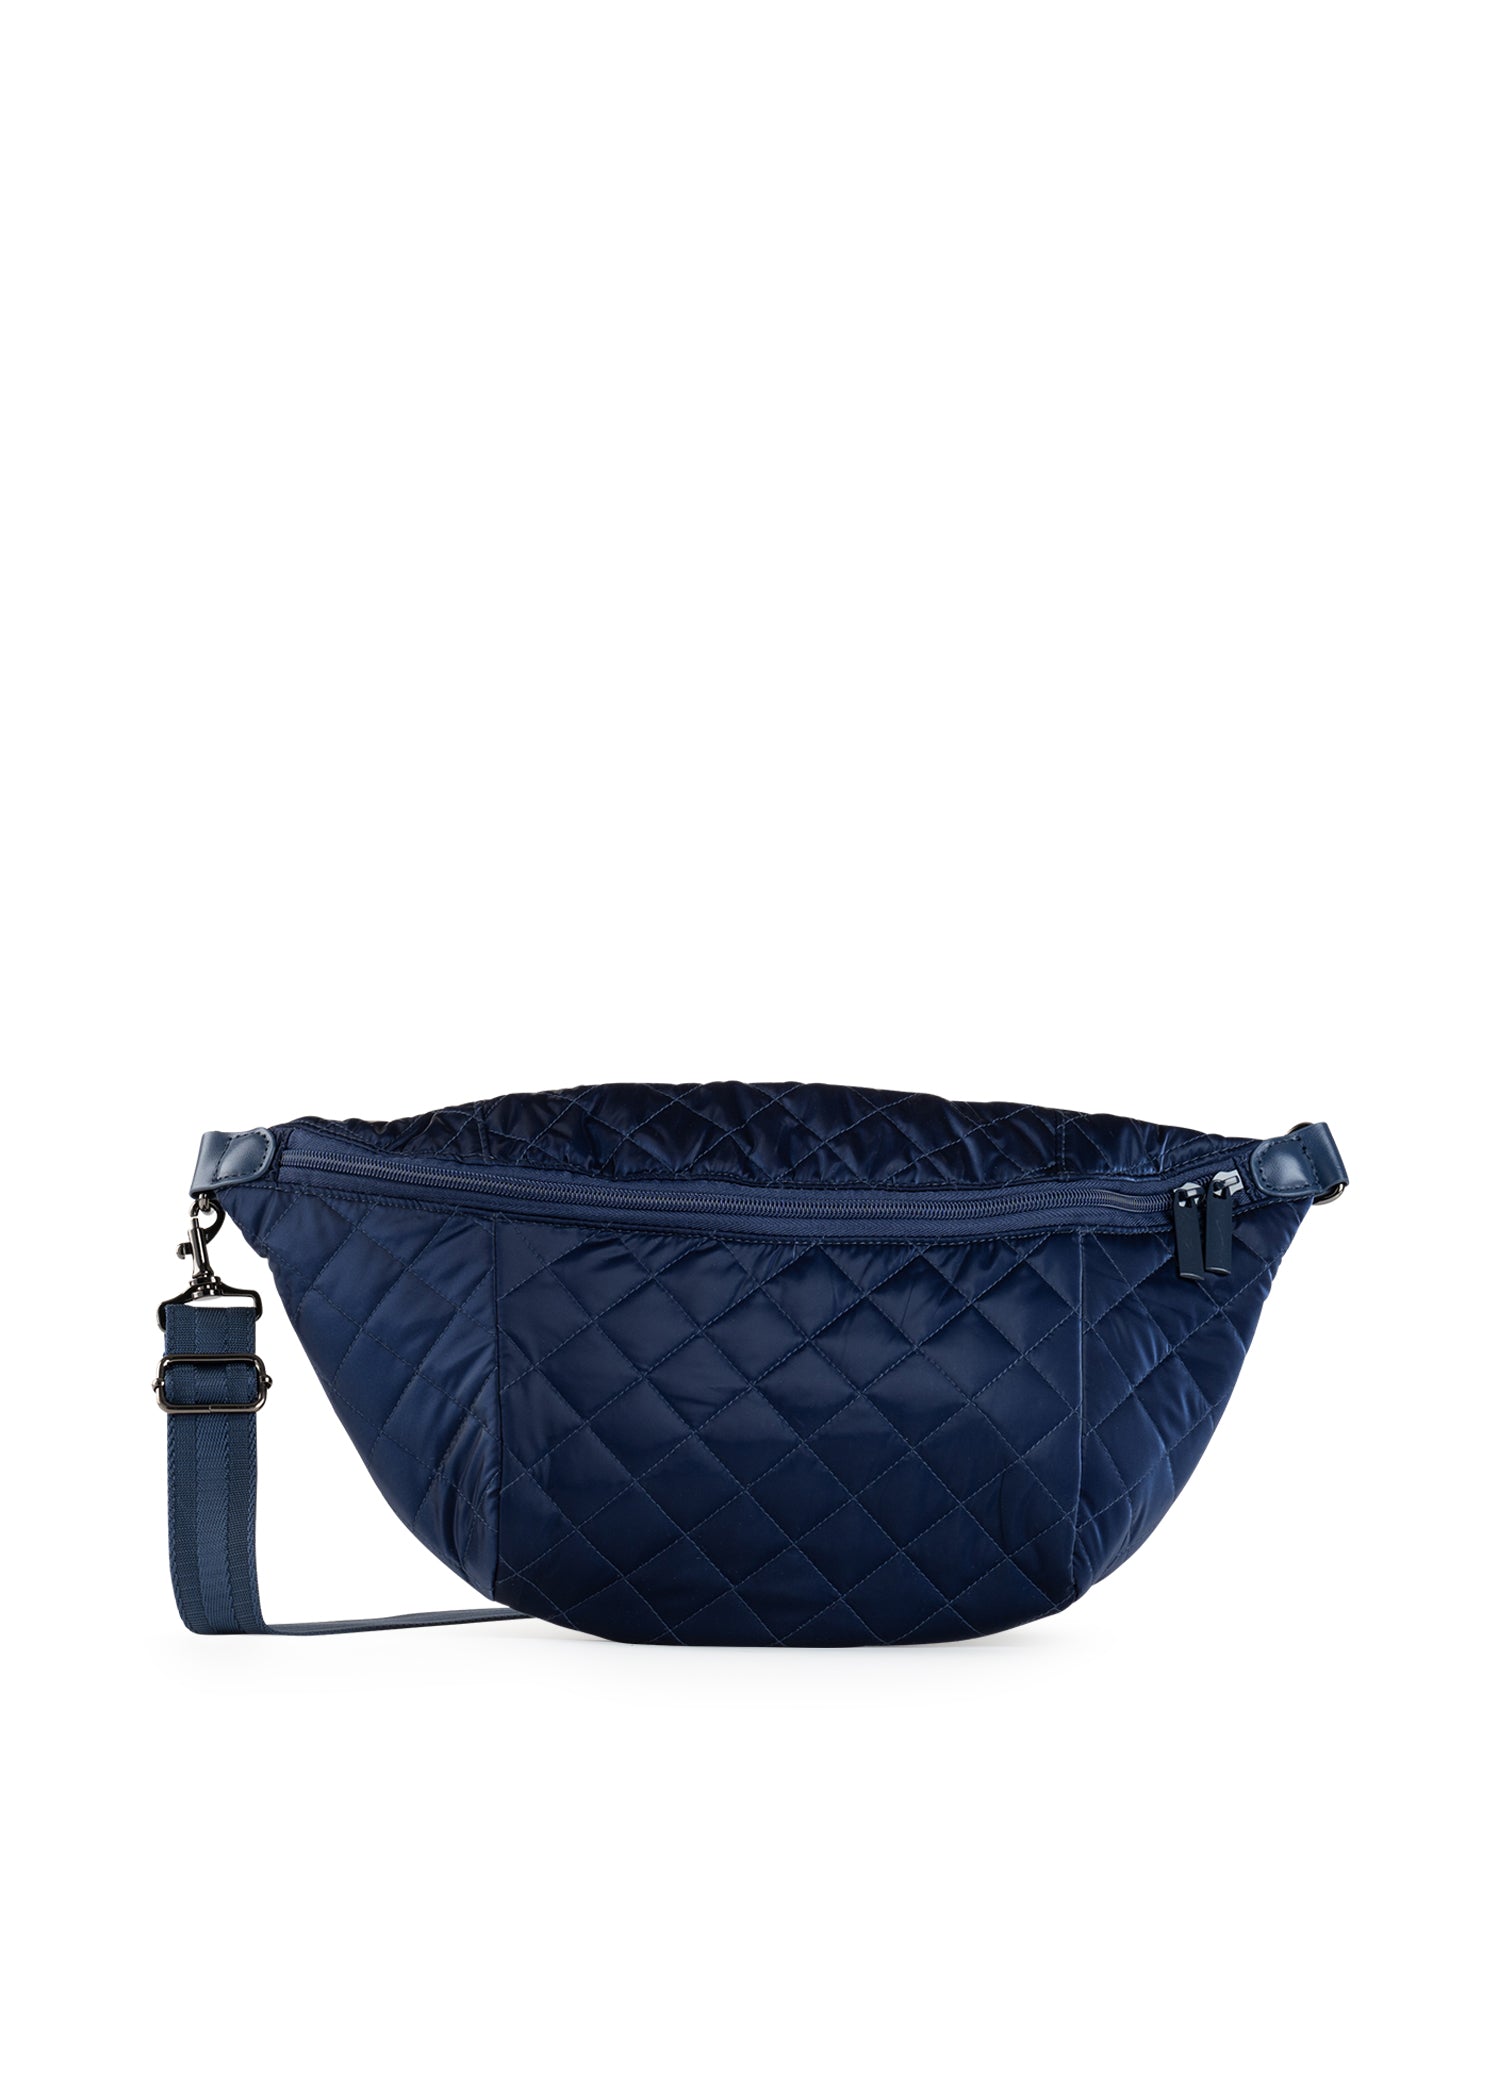 The Emily Pacific Sling Bag